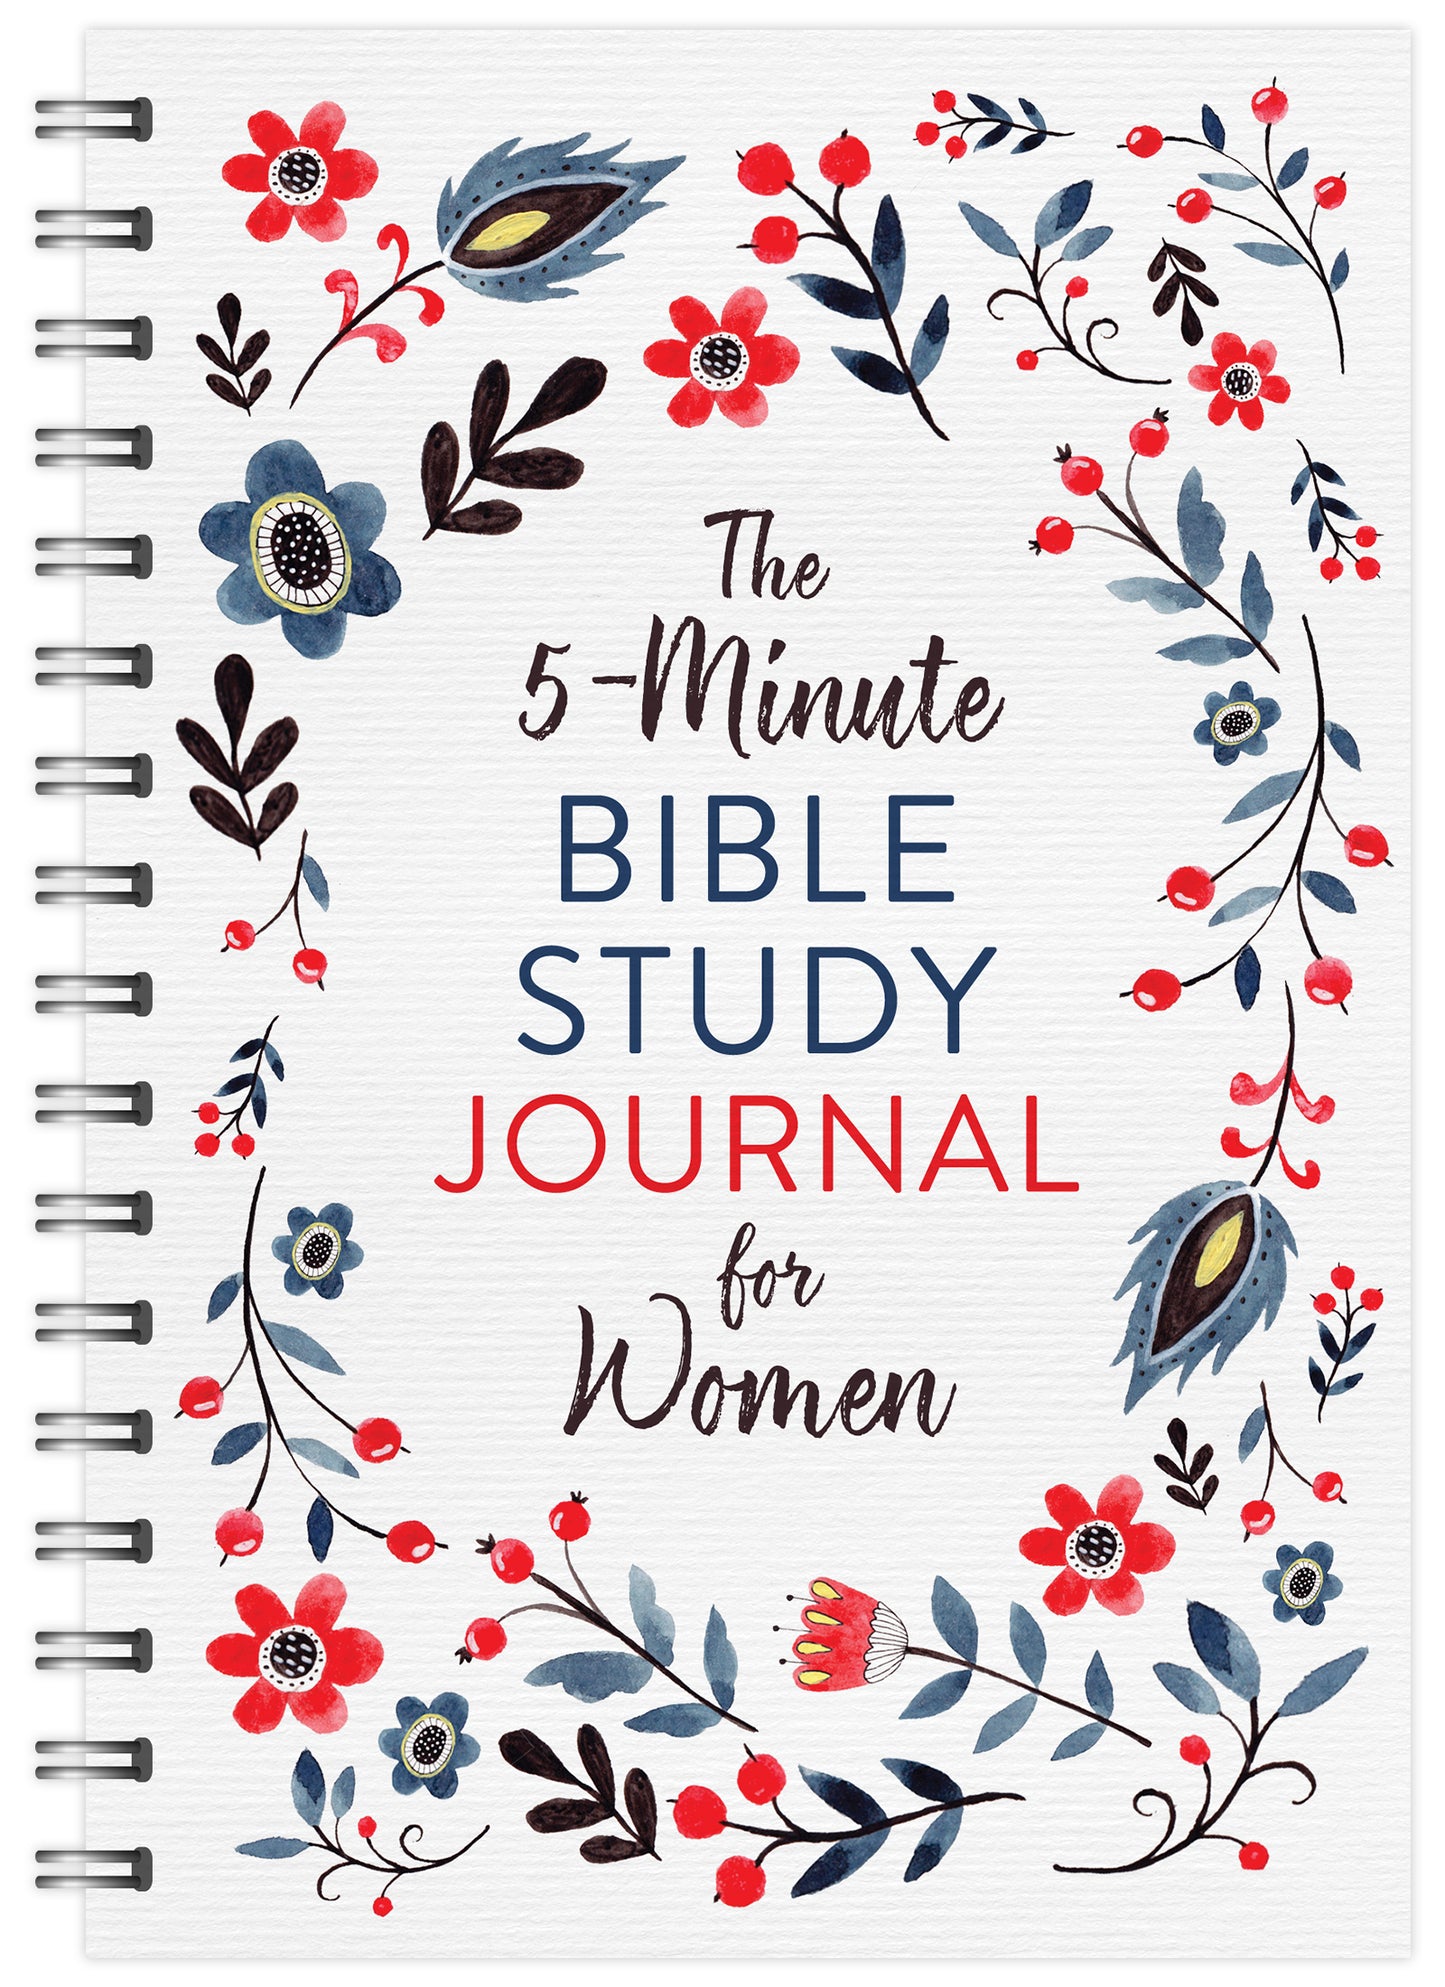 The 5-Minute Bible Study Journal for Women - The Christian Gift Company